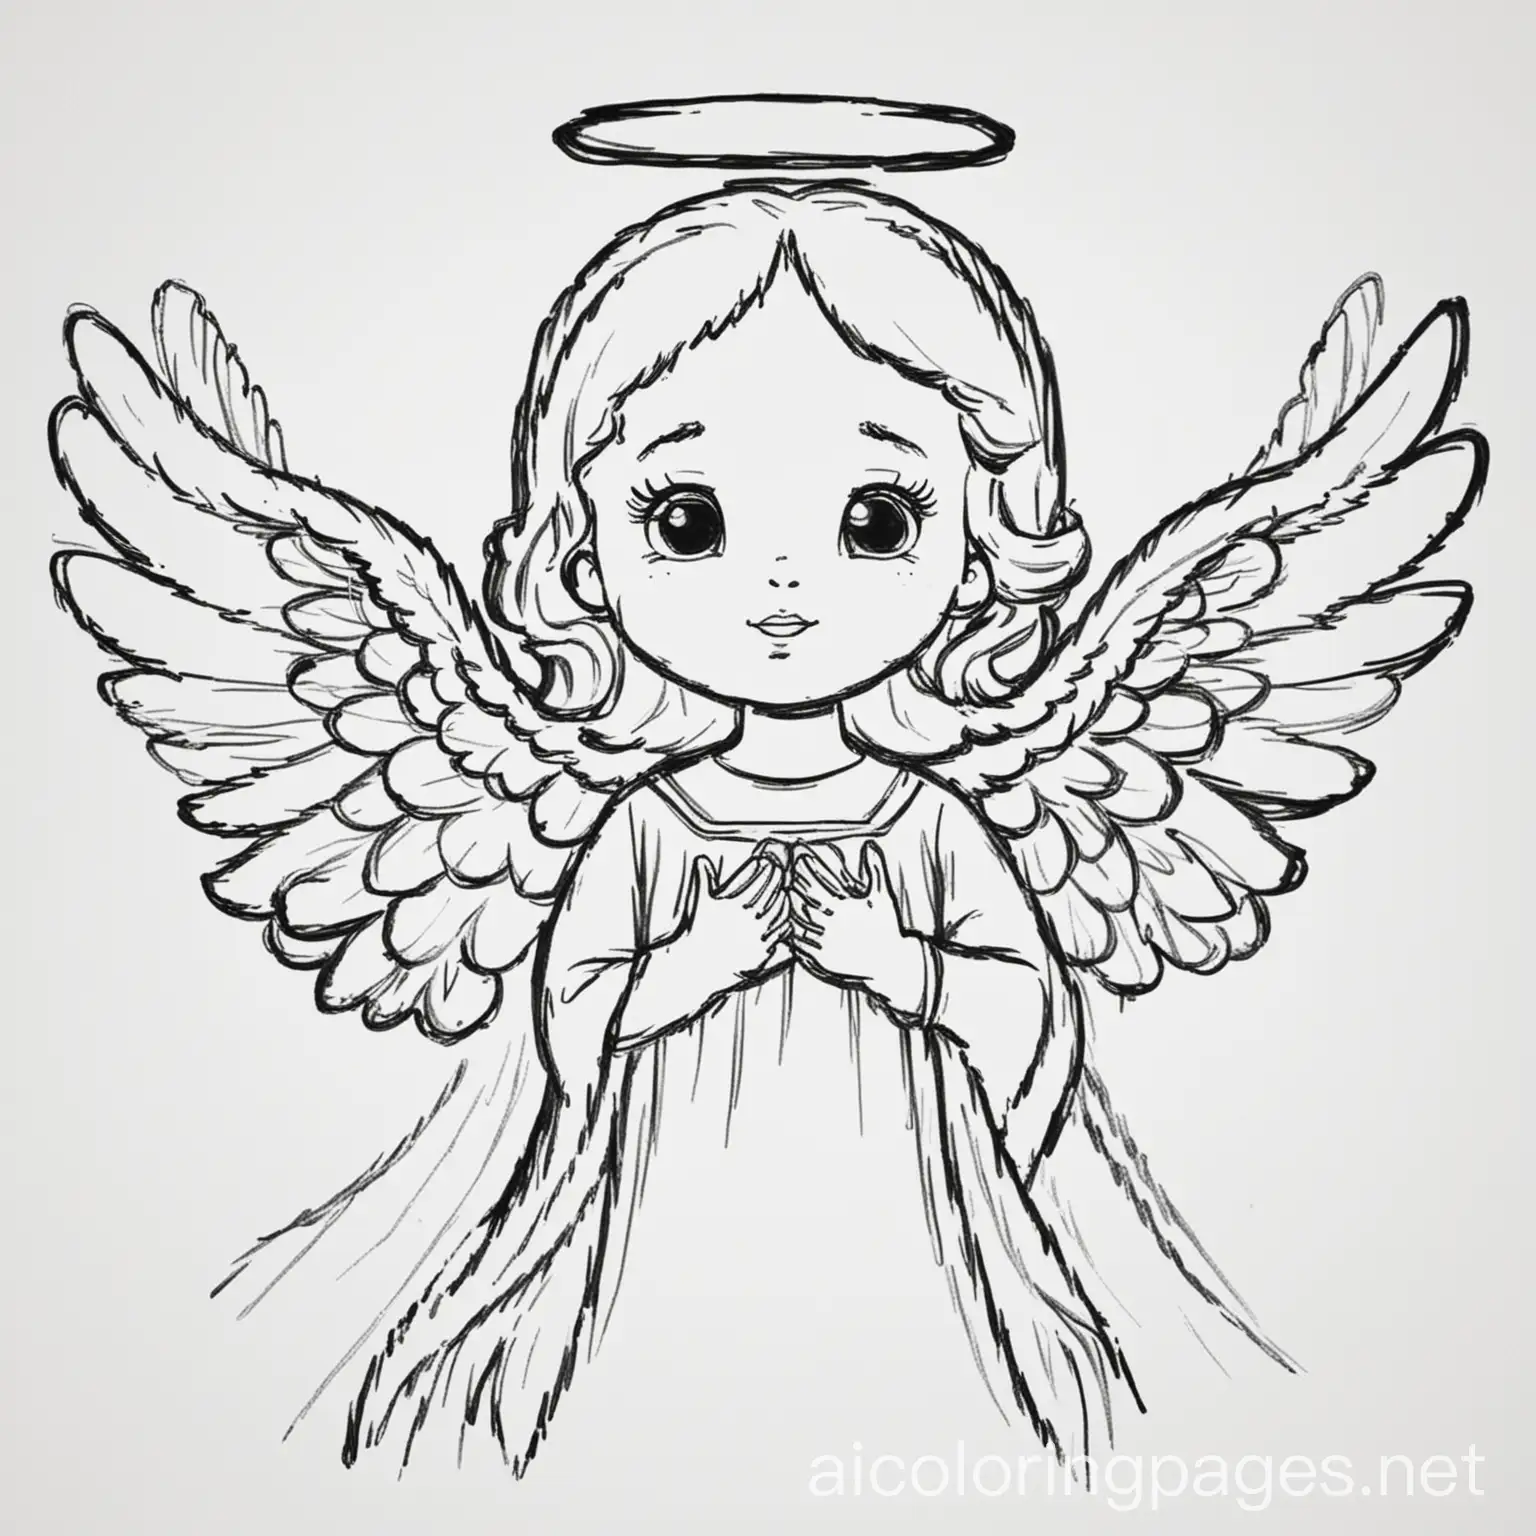 An angel, Coloring Page, black and white, line art, white background, Simplicity, Ample White Space. The background of the coloring page is plain white to make it easy for young children to color within the lines. The outlines of all the subjects are easy to distinguish, making it simple for kids to color without too much difficulty